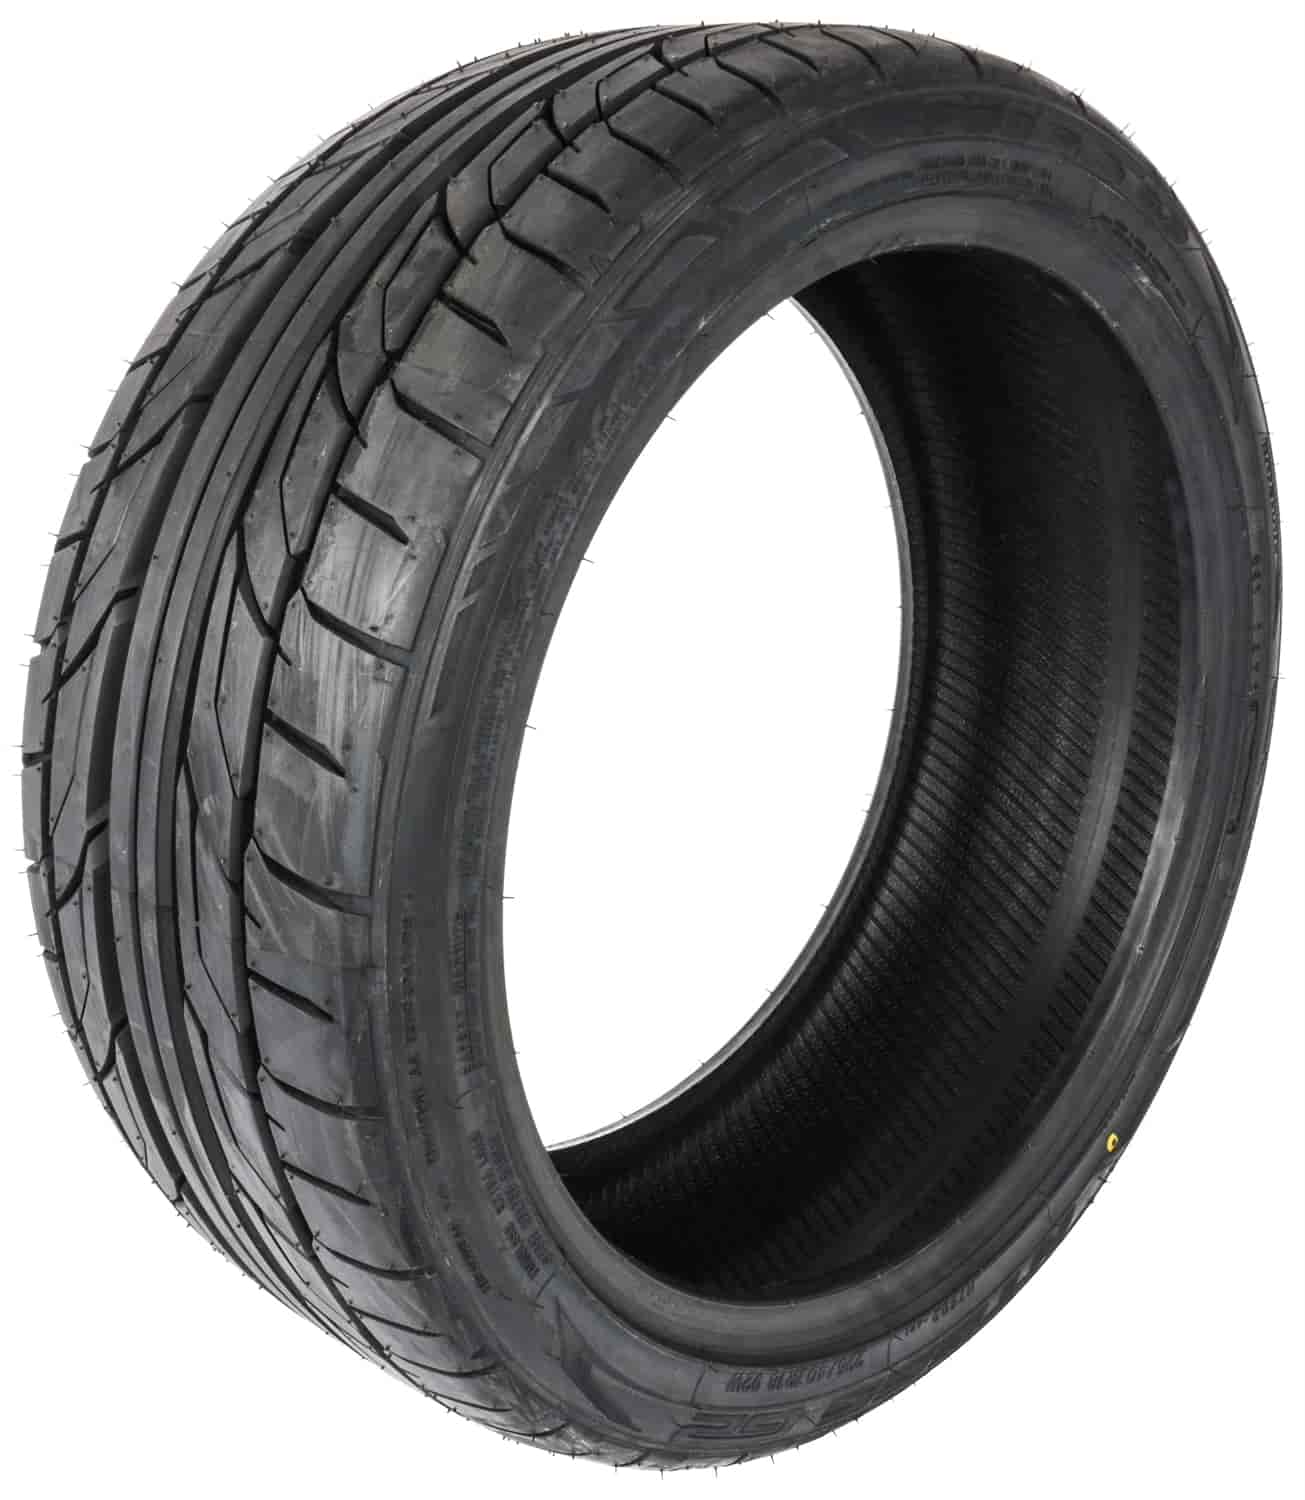 NT555 G2 Summer UHP Radial Tire 225/40R18